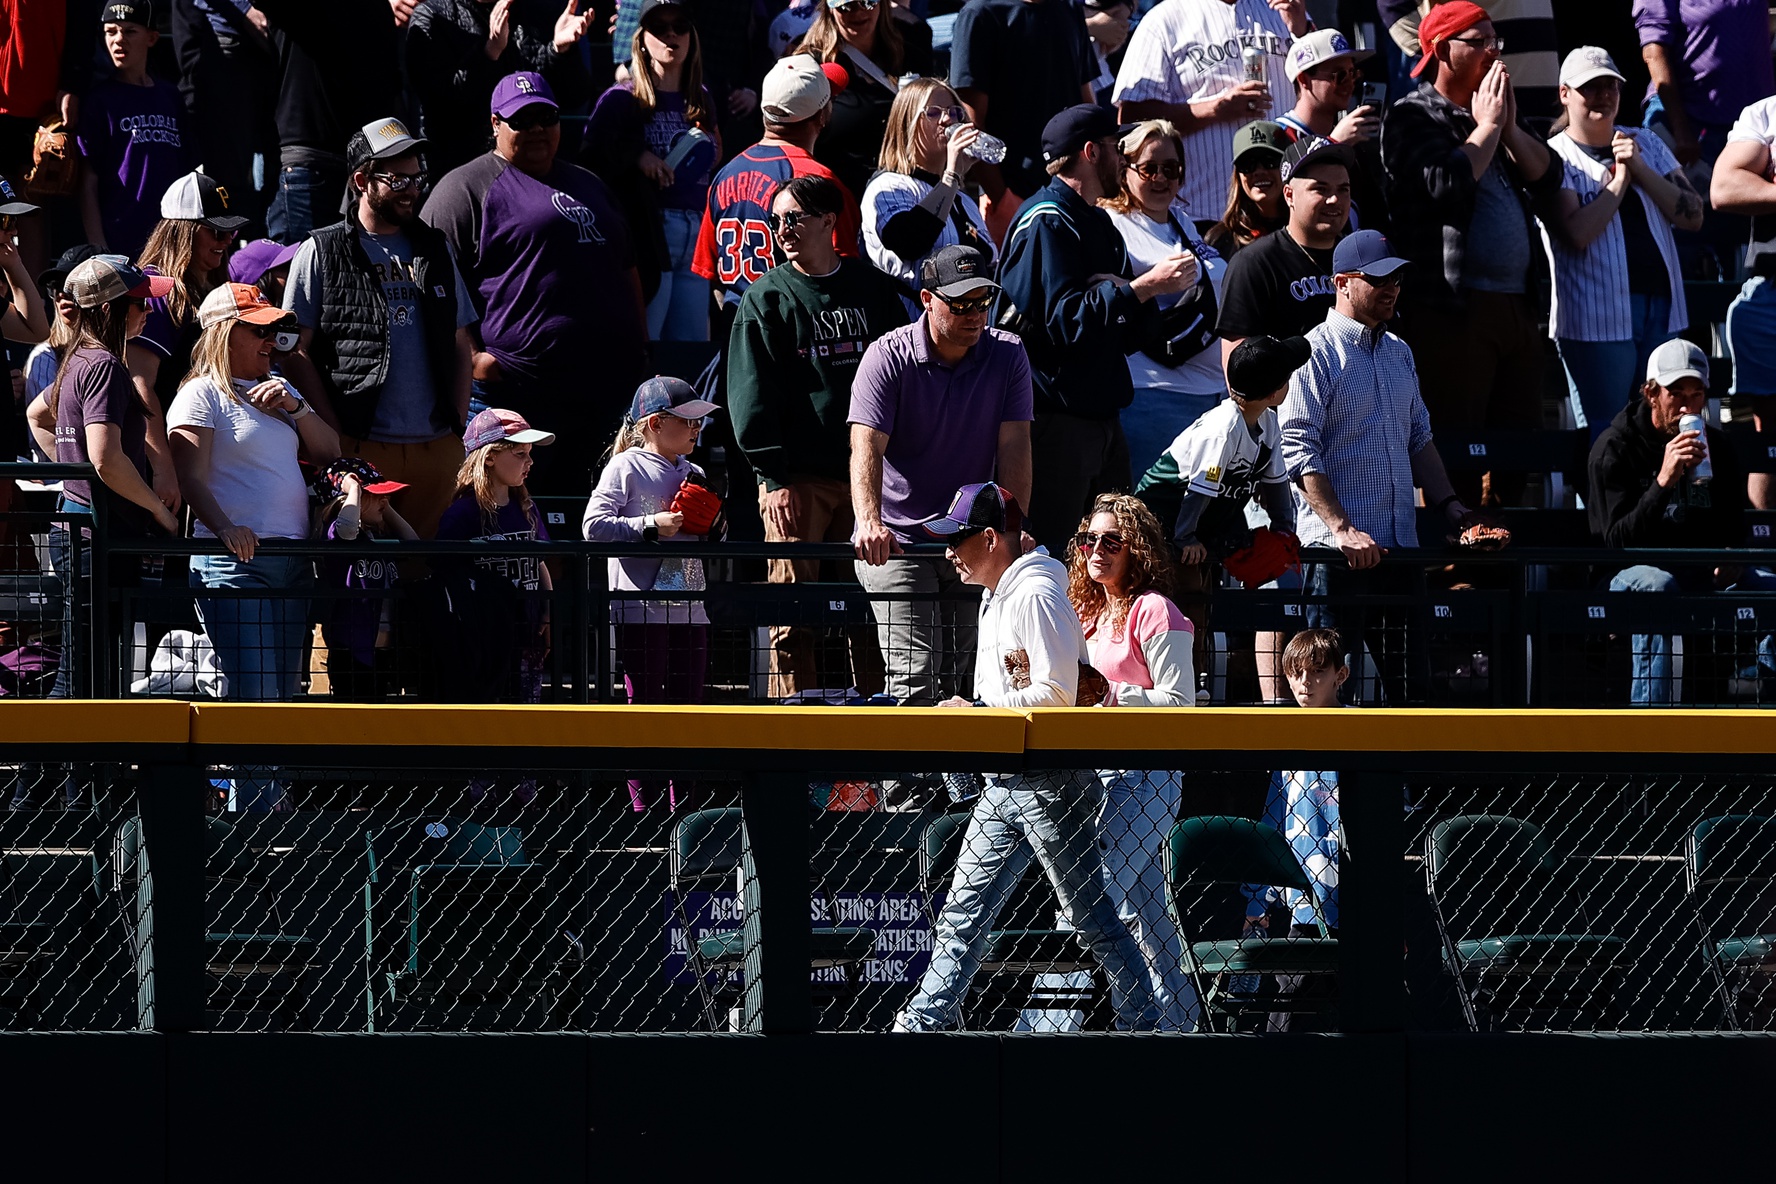 Fan Interference Nullifies Rockies Catcher's Walk-Off Home Run